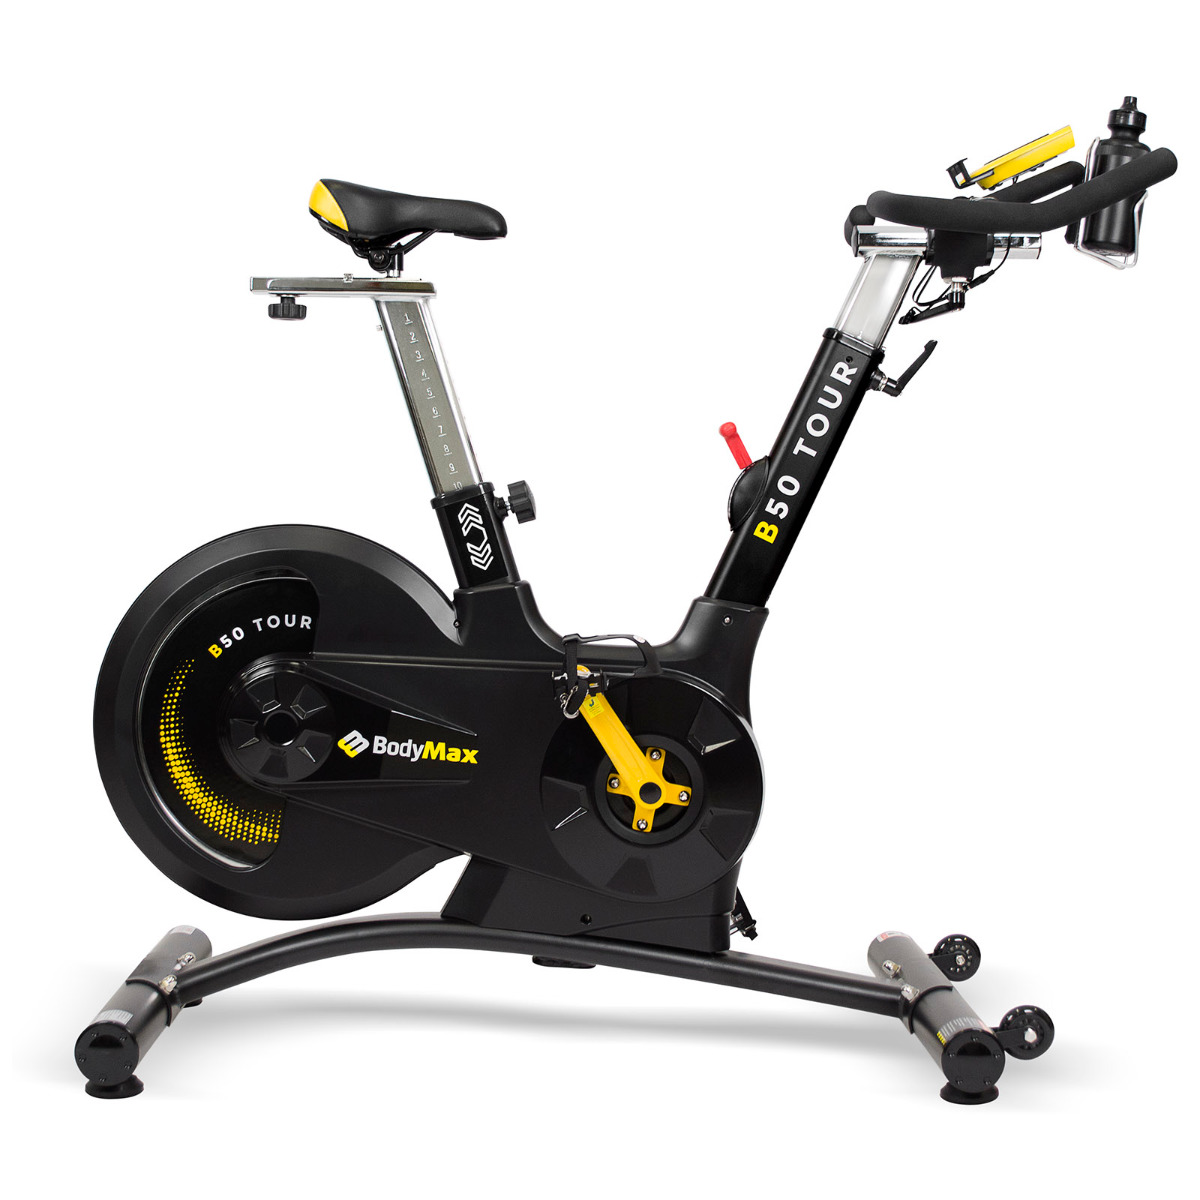 Spin Bike Icon at Vectorified.com | Collection of Spin Bike Icon free ...